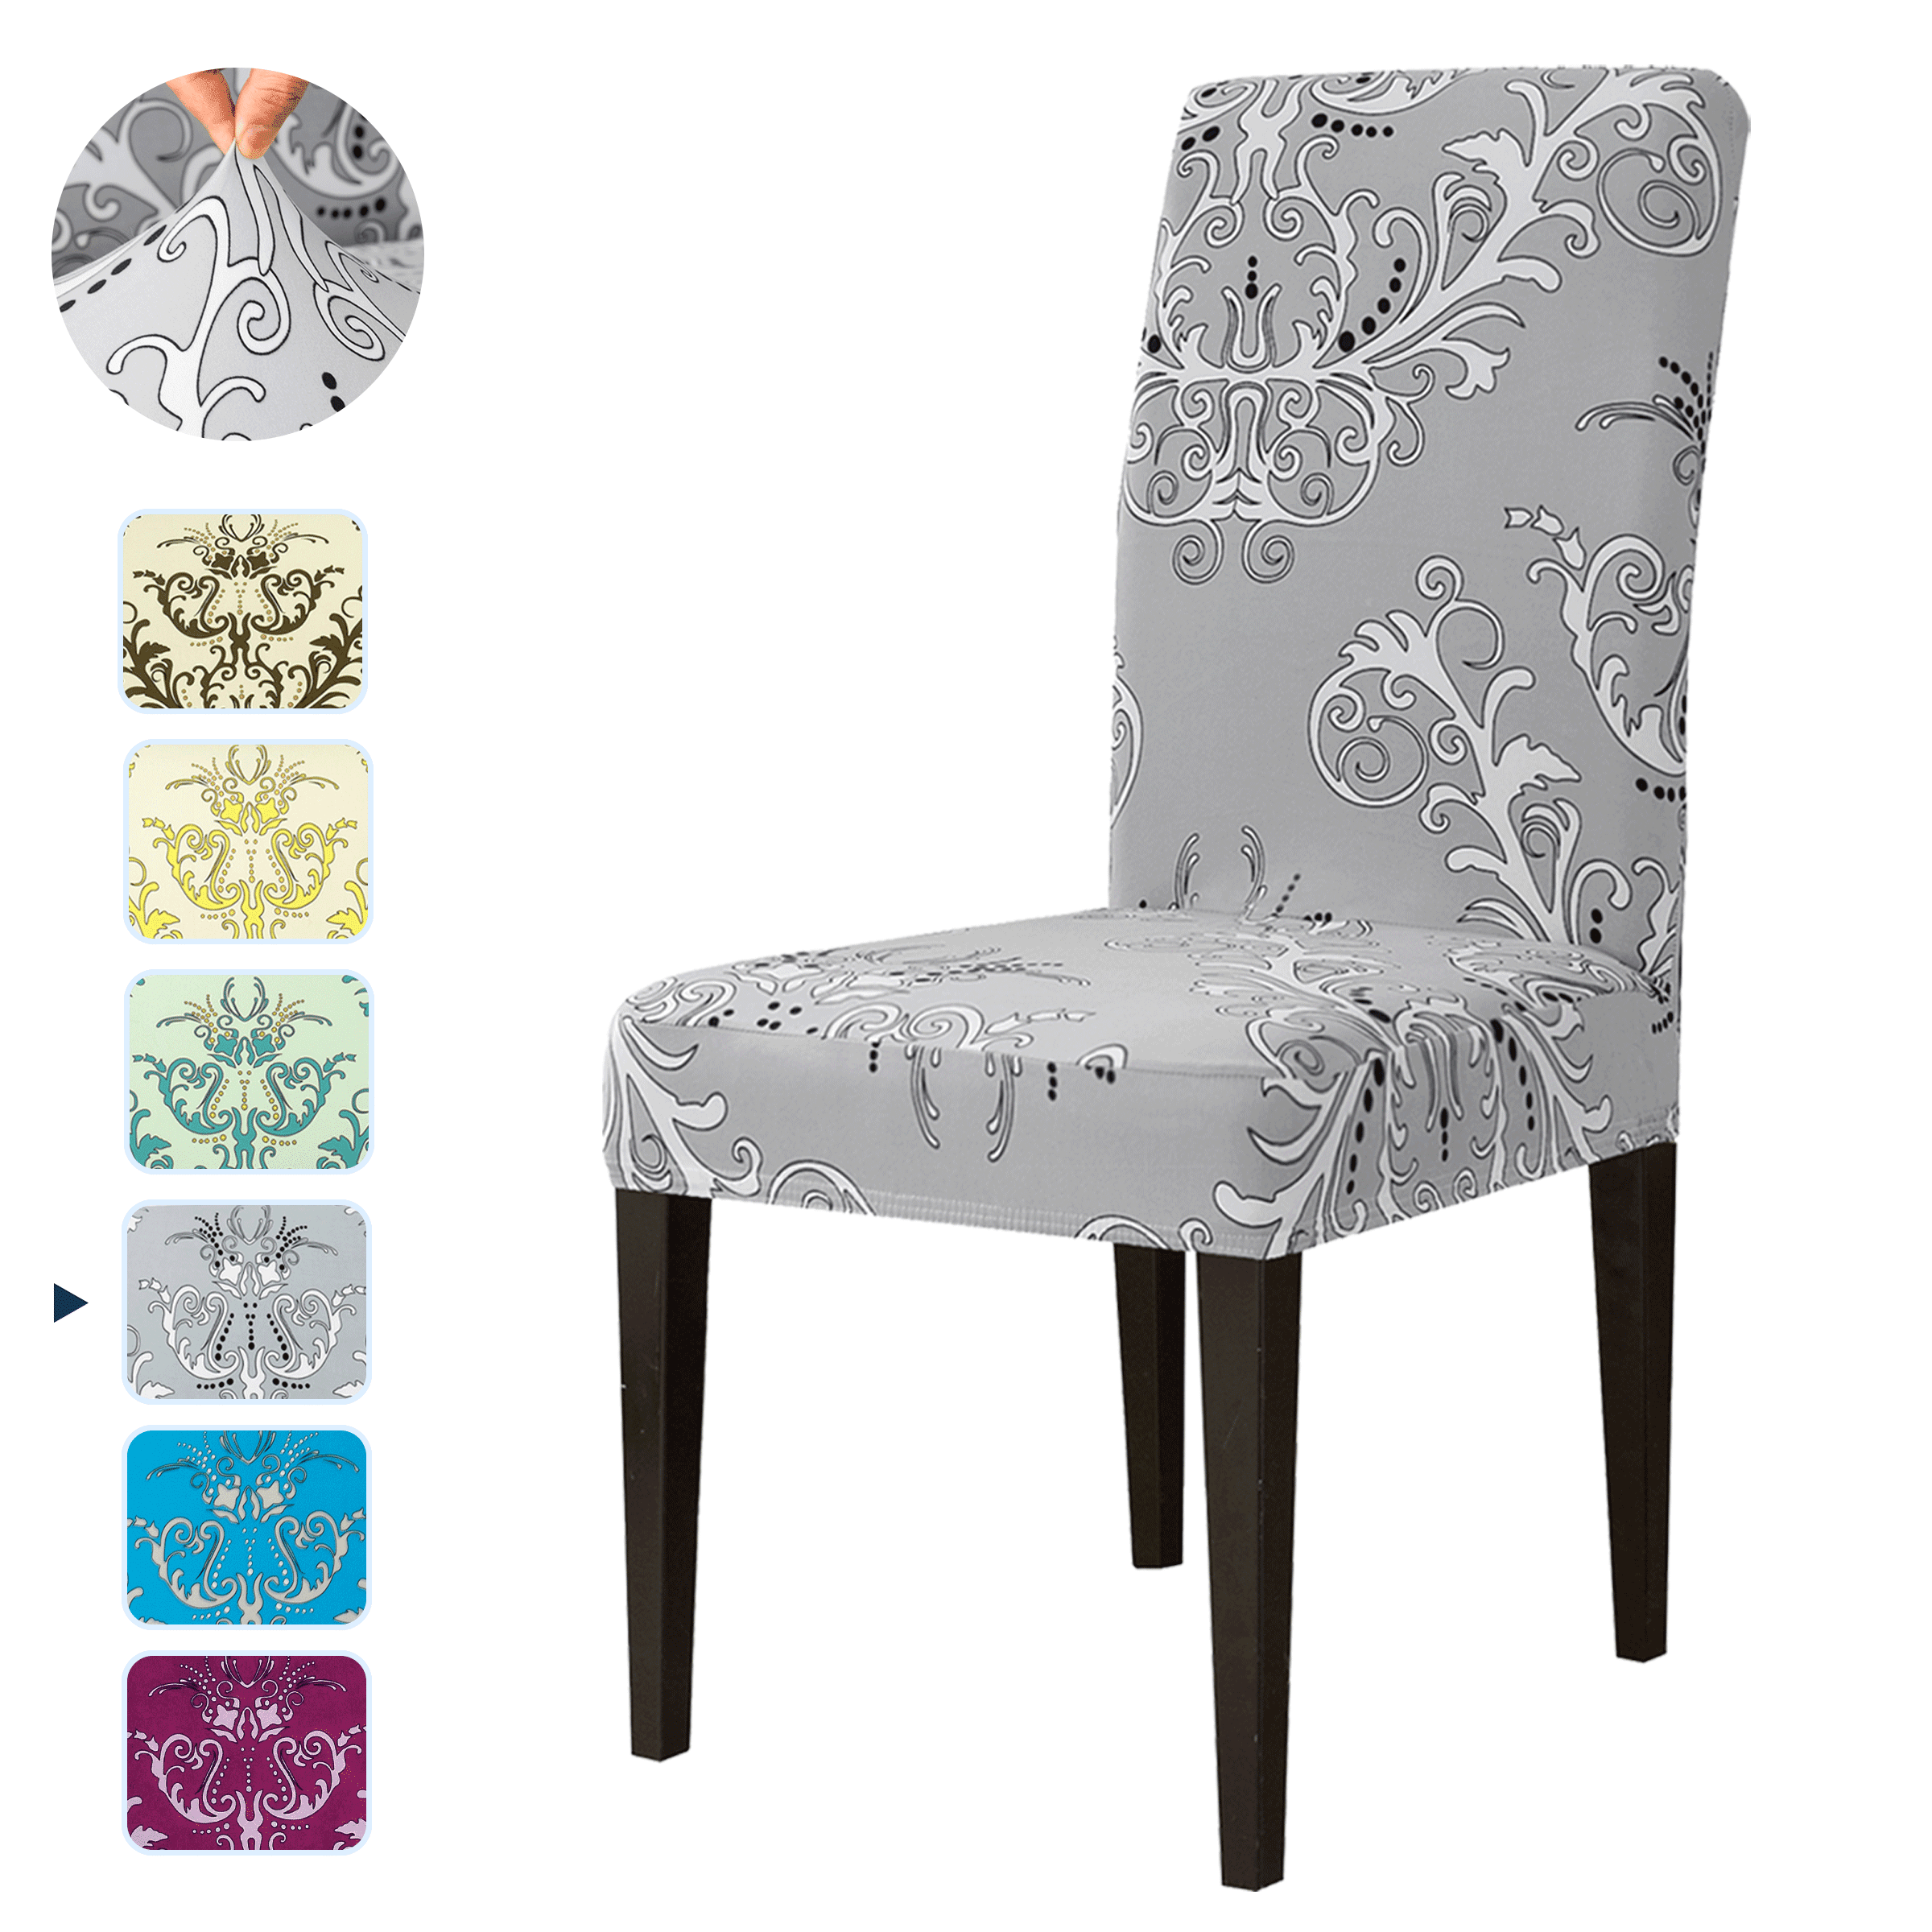 Details about   1/4/6pcs Spandex Stretch Dining Room Floral Printed Chair Covers Slipcovers Home 